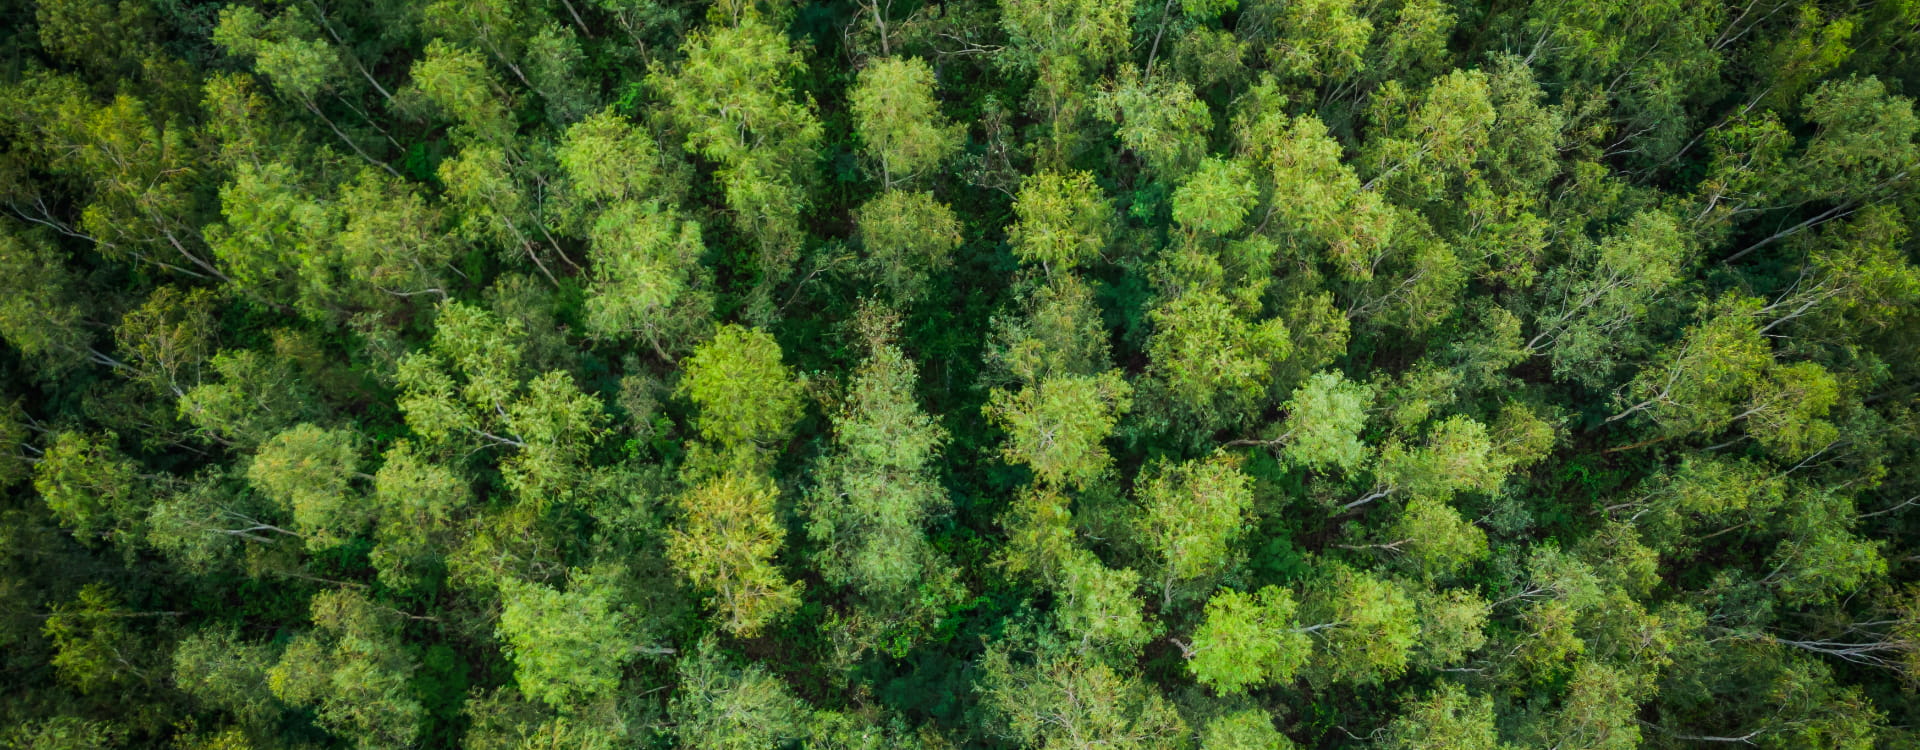 Aerial view of a lush forest of trees with green leaves.